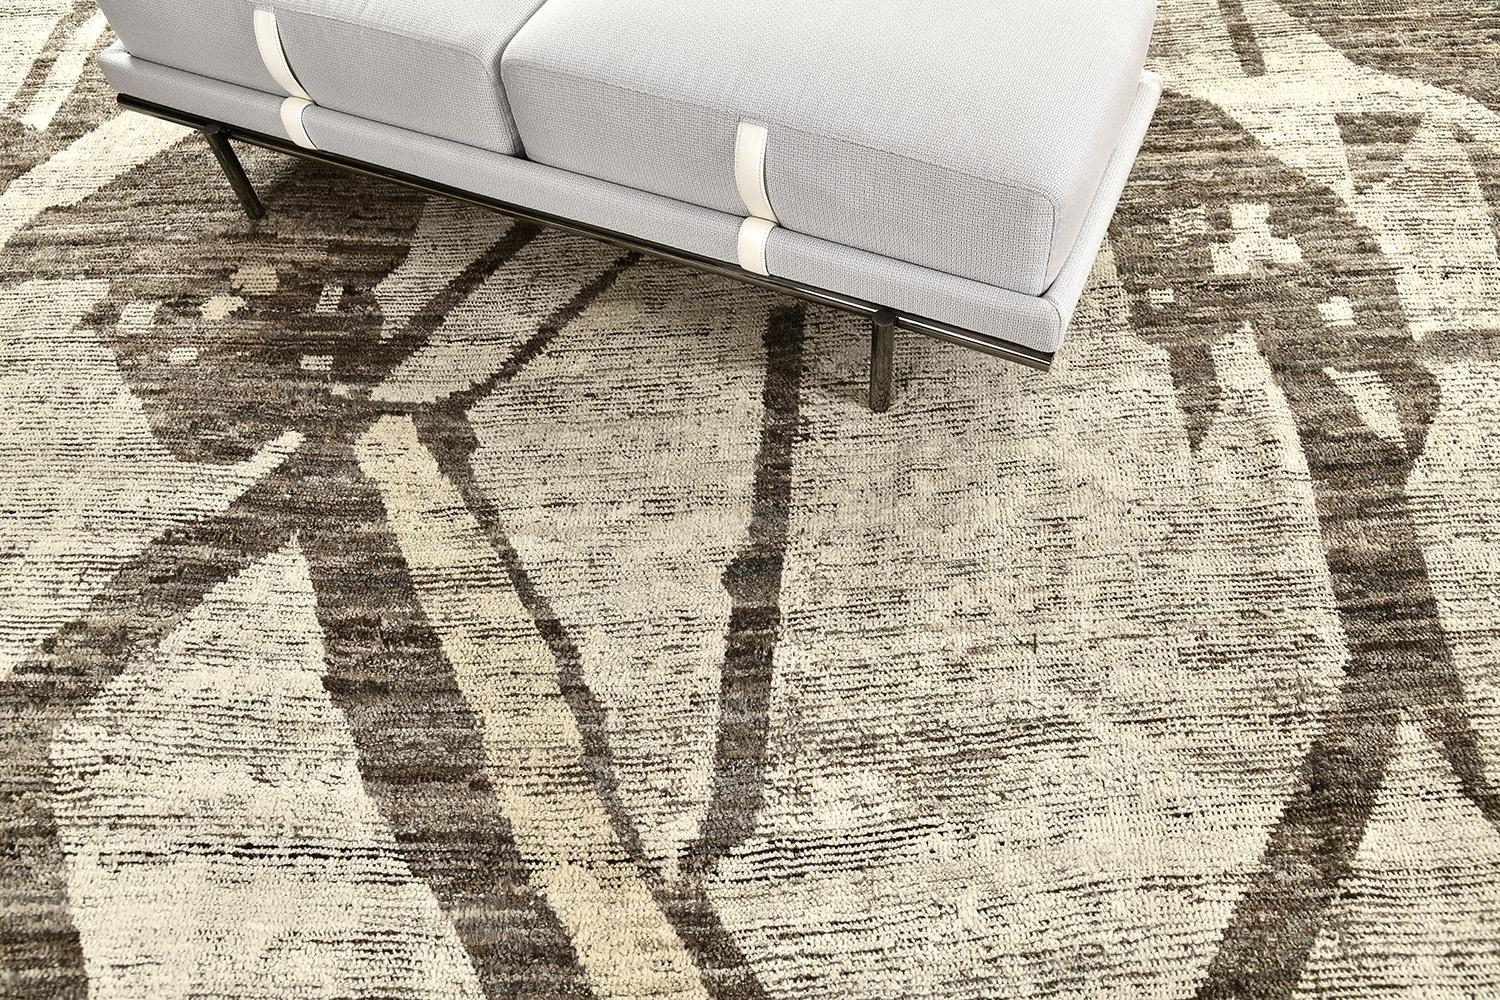 Dakhala' is a beautifully textured rug with irregular motifs inspired from the Atlas Mountains of Morocco. Earth-toned colored shag and hints of colorwork cohesively make for a great contemporary interpretation for the modern design world.